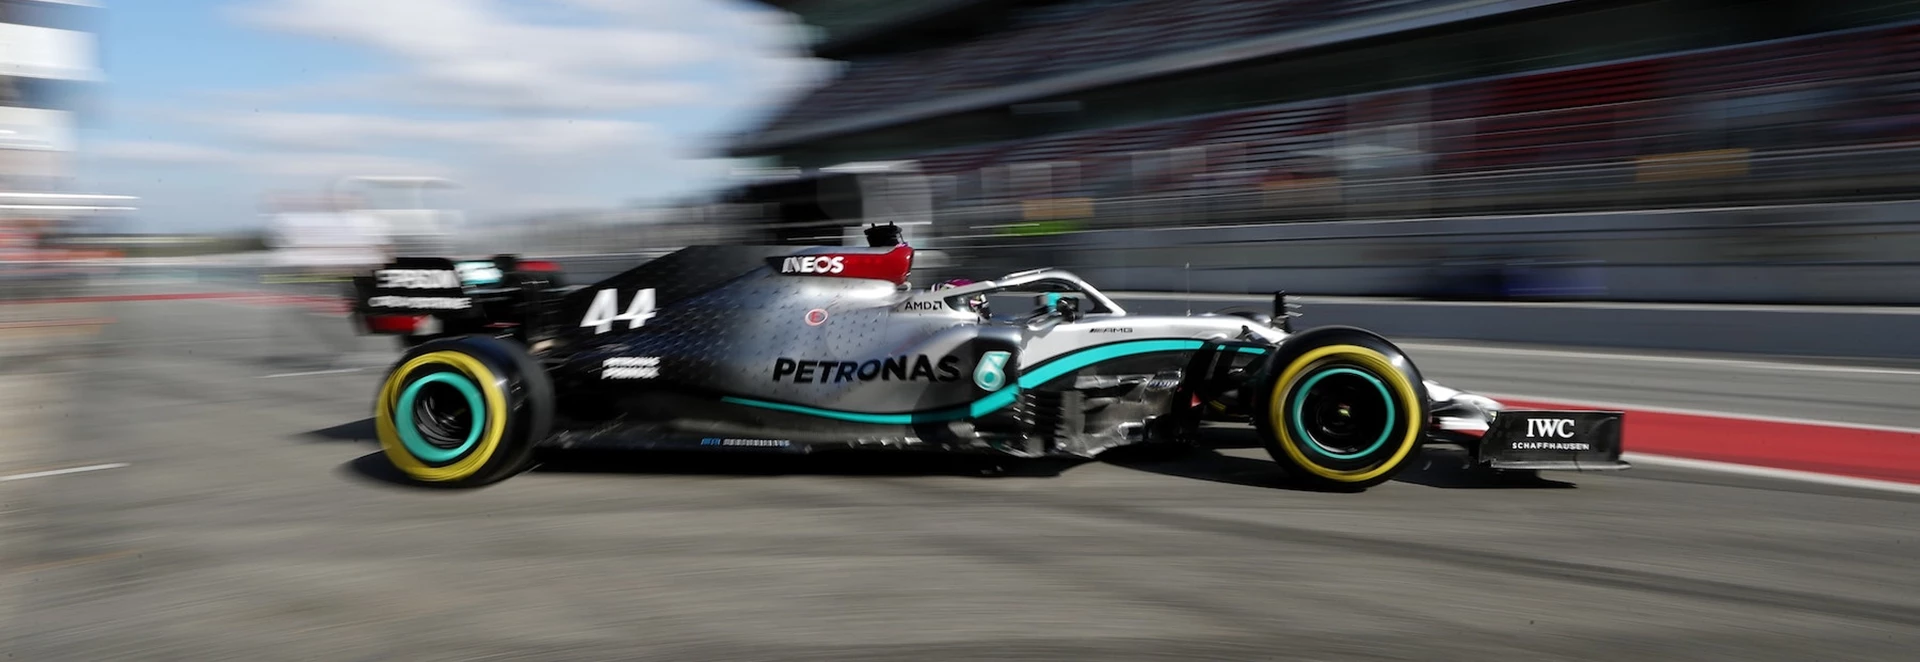 Mercedes F1 team begins producing breathing aid to tackle Covid-19 crisis